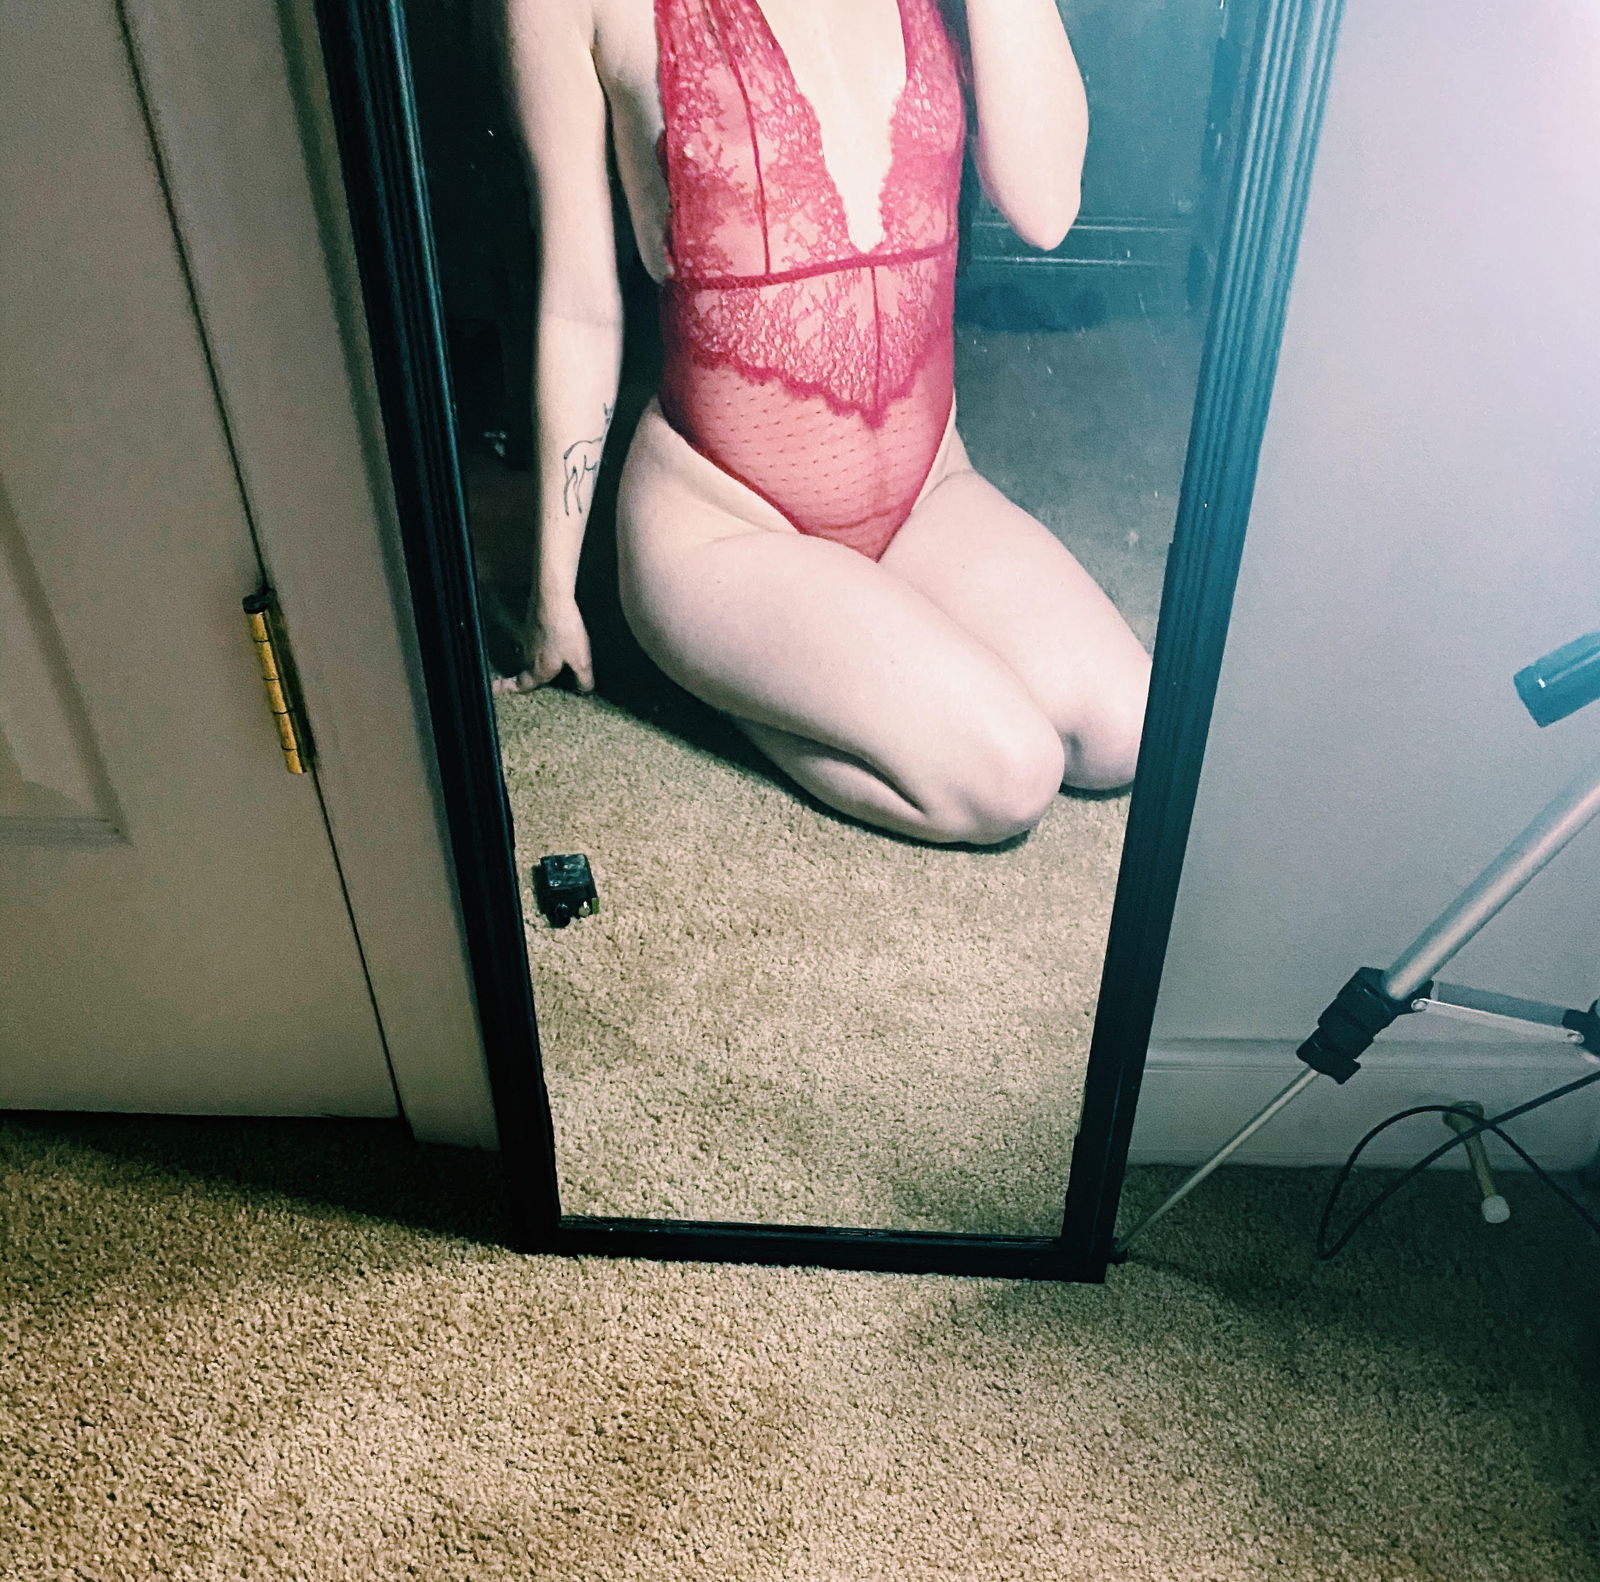 Photo by zoeyReid20 with the username @zoeyReid20,  December 23, 2019 at 8:03 PM. The post is about the topic Sexsells and the text says '<3 add me on (kik) zoeyreid20
or add me on (snapchat) zoey_reid6553
I do any kind of custom photos! 
I sell socks,panties,bas,thongs and shoes.
everything your into im into ;)

i accept payment from venmo and cashapp!'